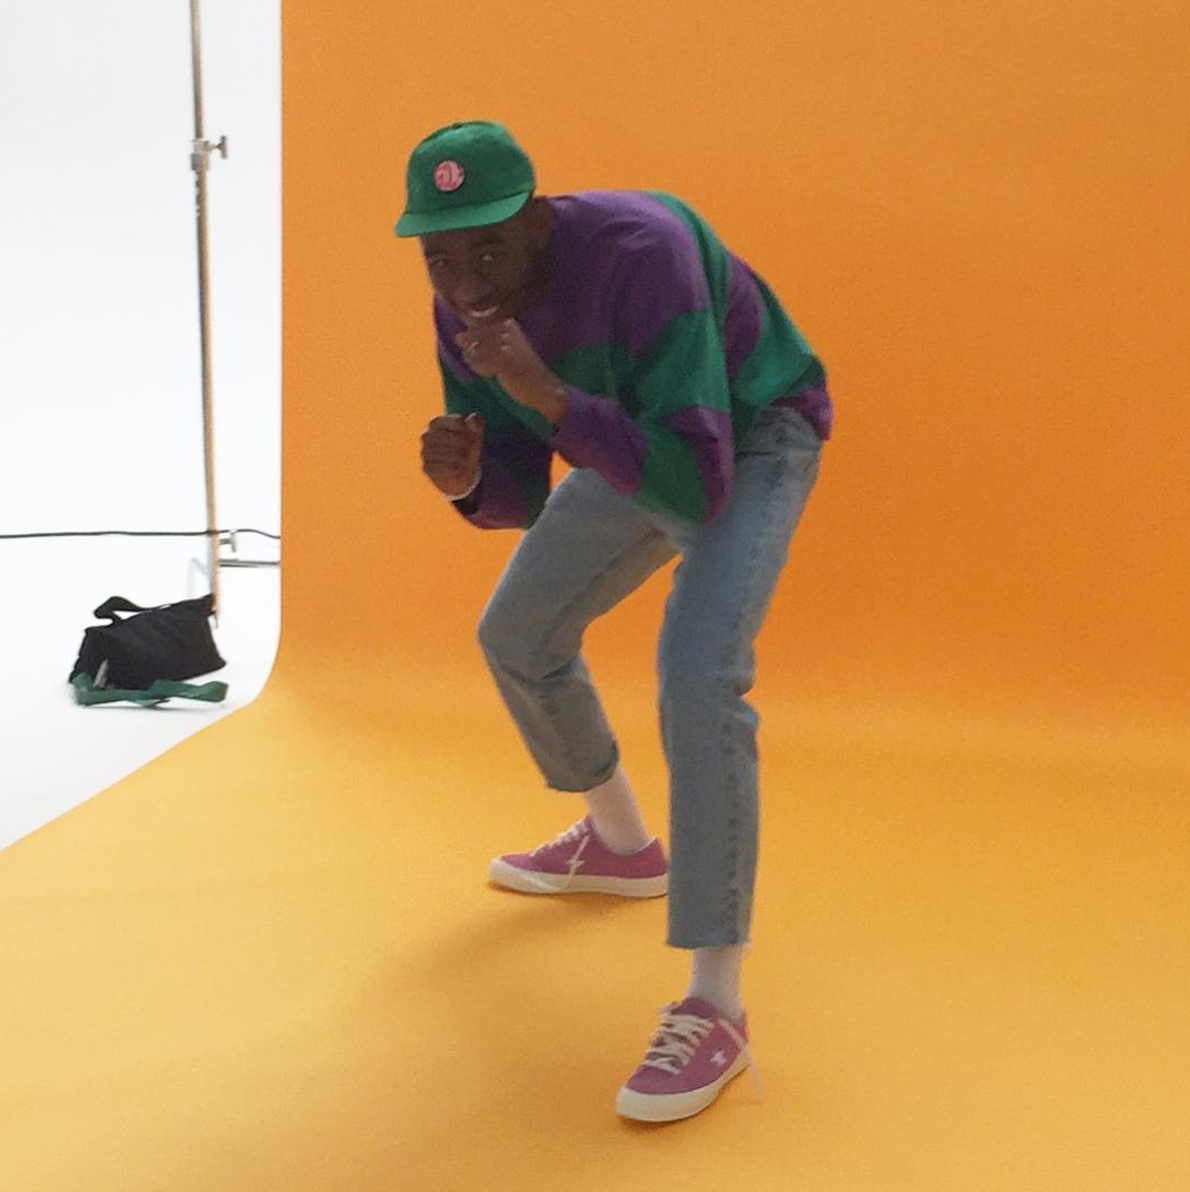 SPOTTED: Tyler, The Creator In His One Star x Golf Le Fleur Converse